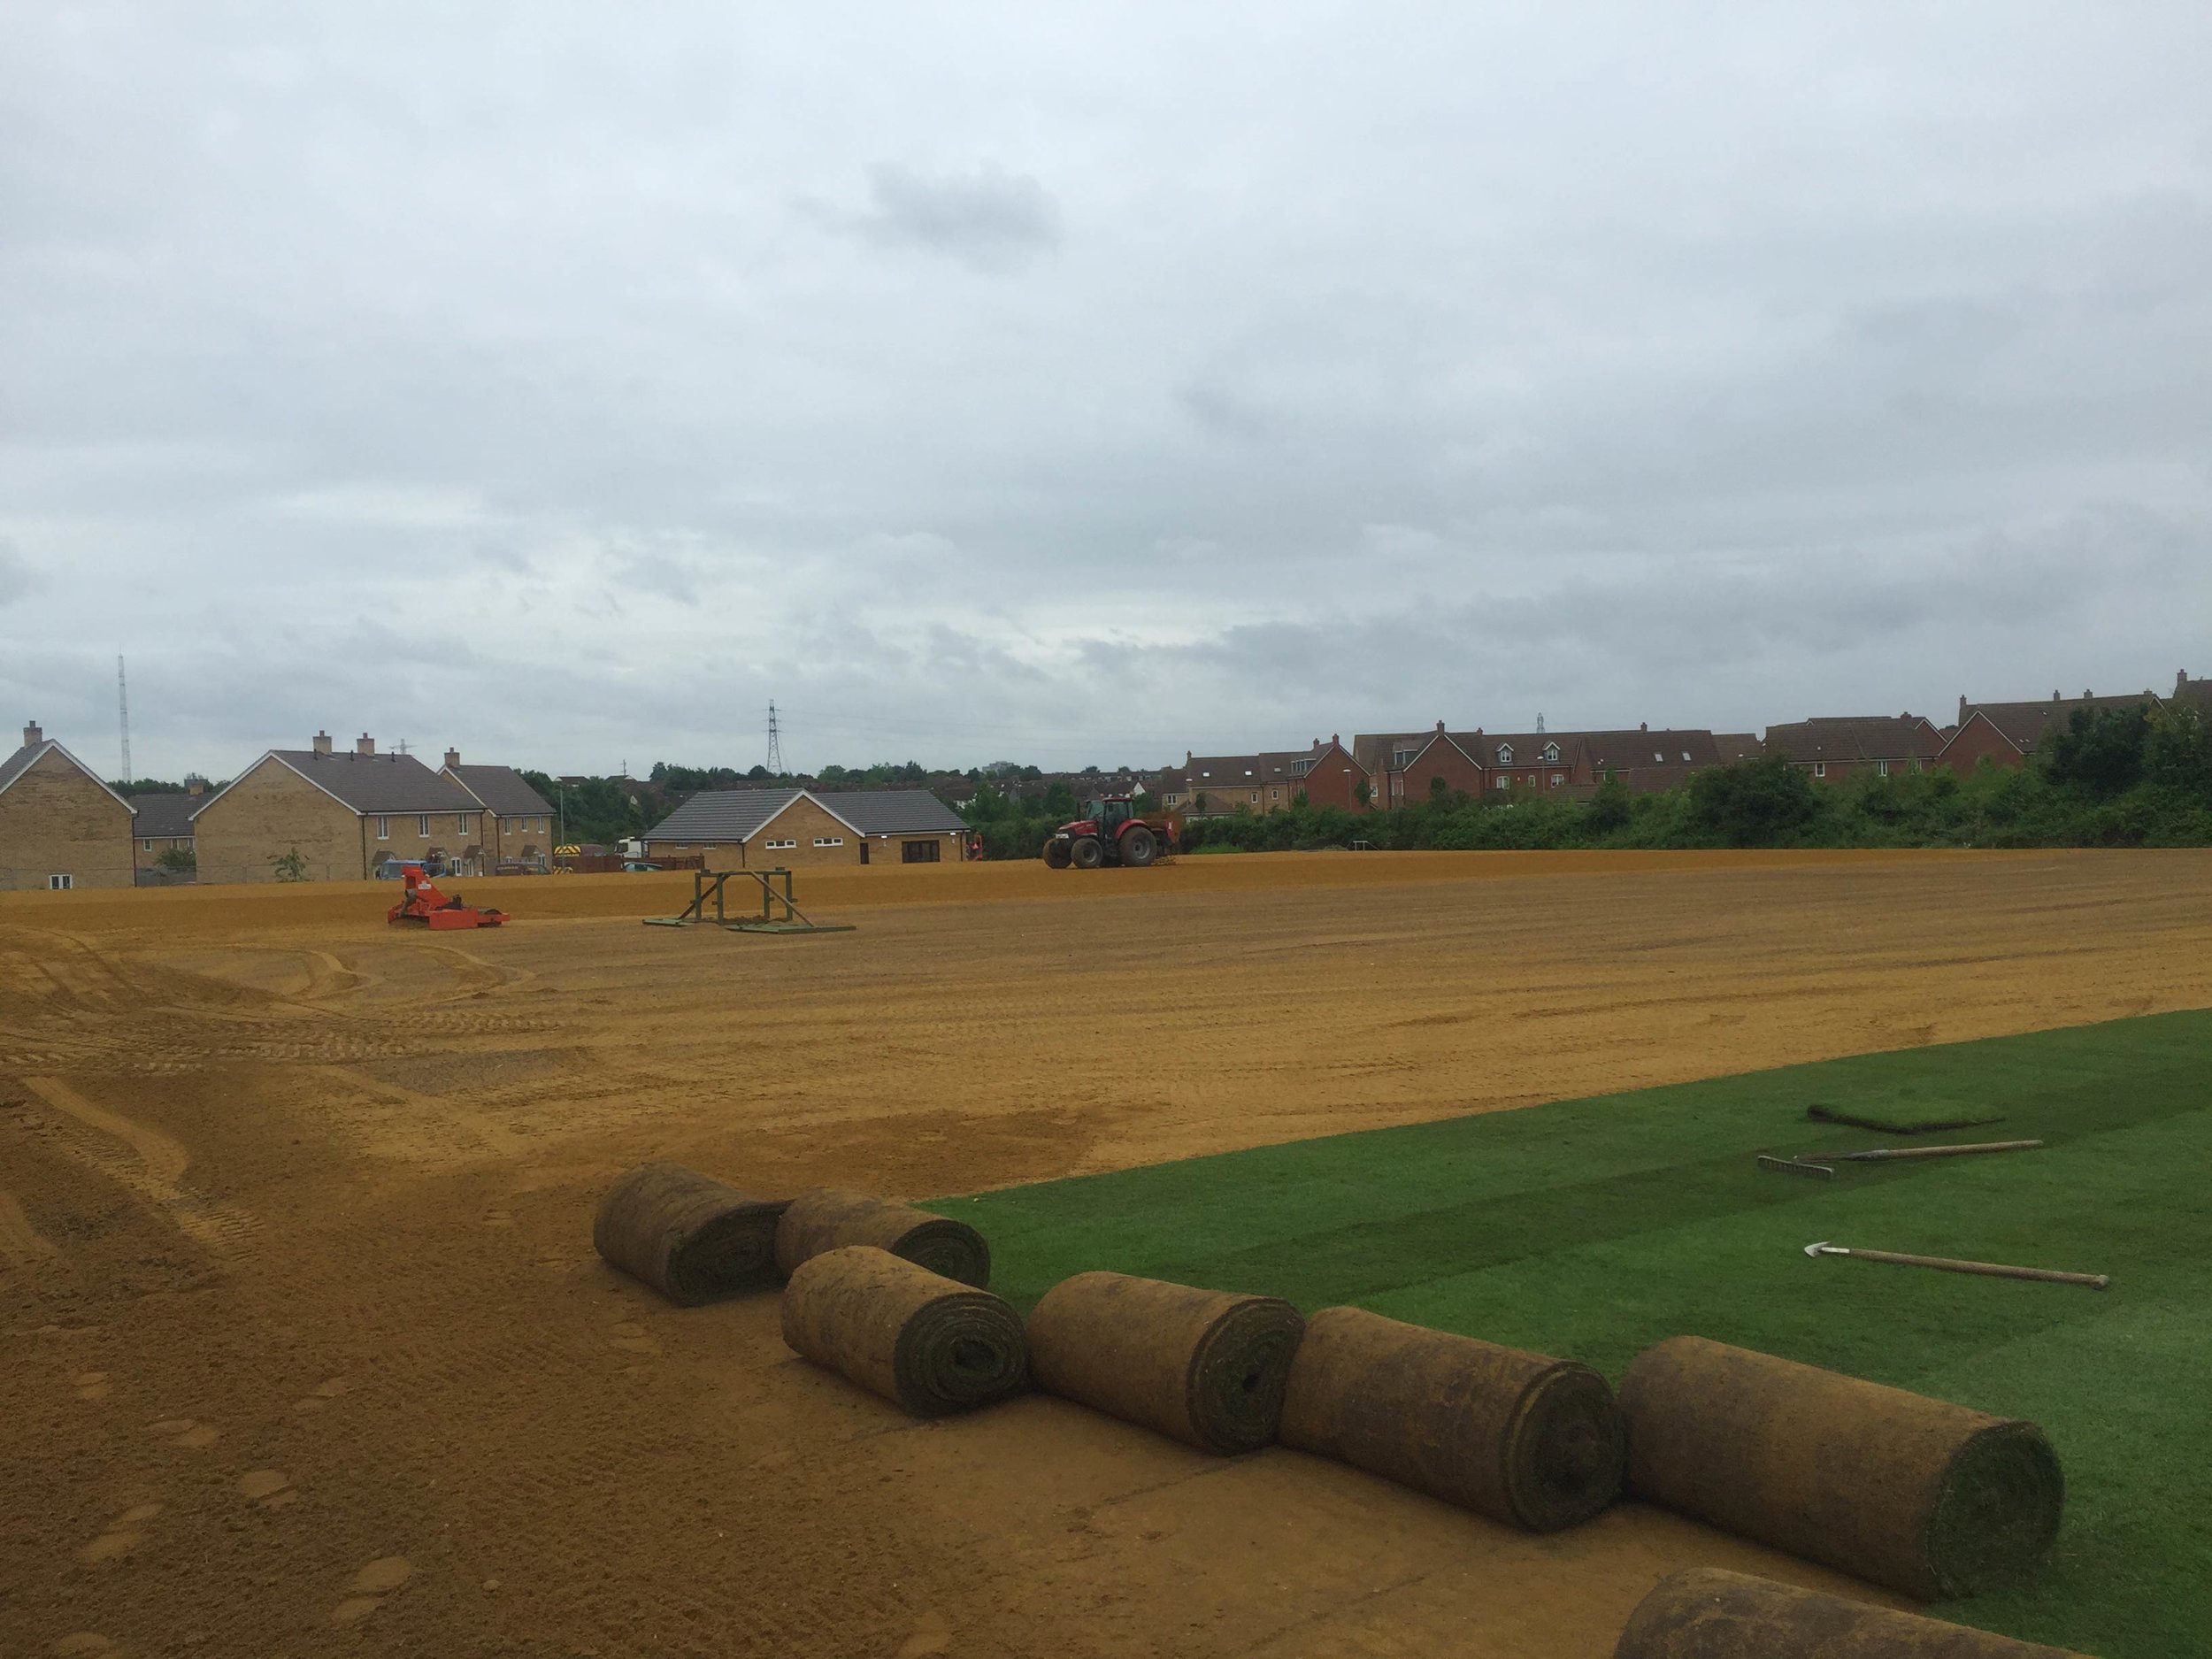  600mm 'Big Roll' turf is laid to get the facilities in full use for the community in time for the completion of the housing development. 